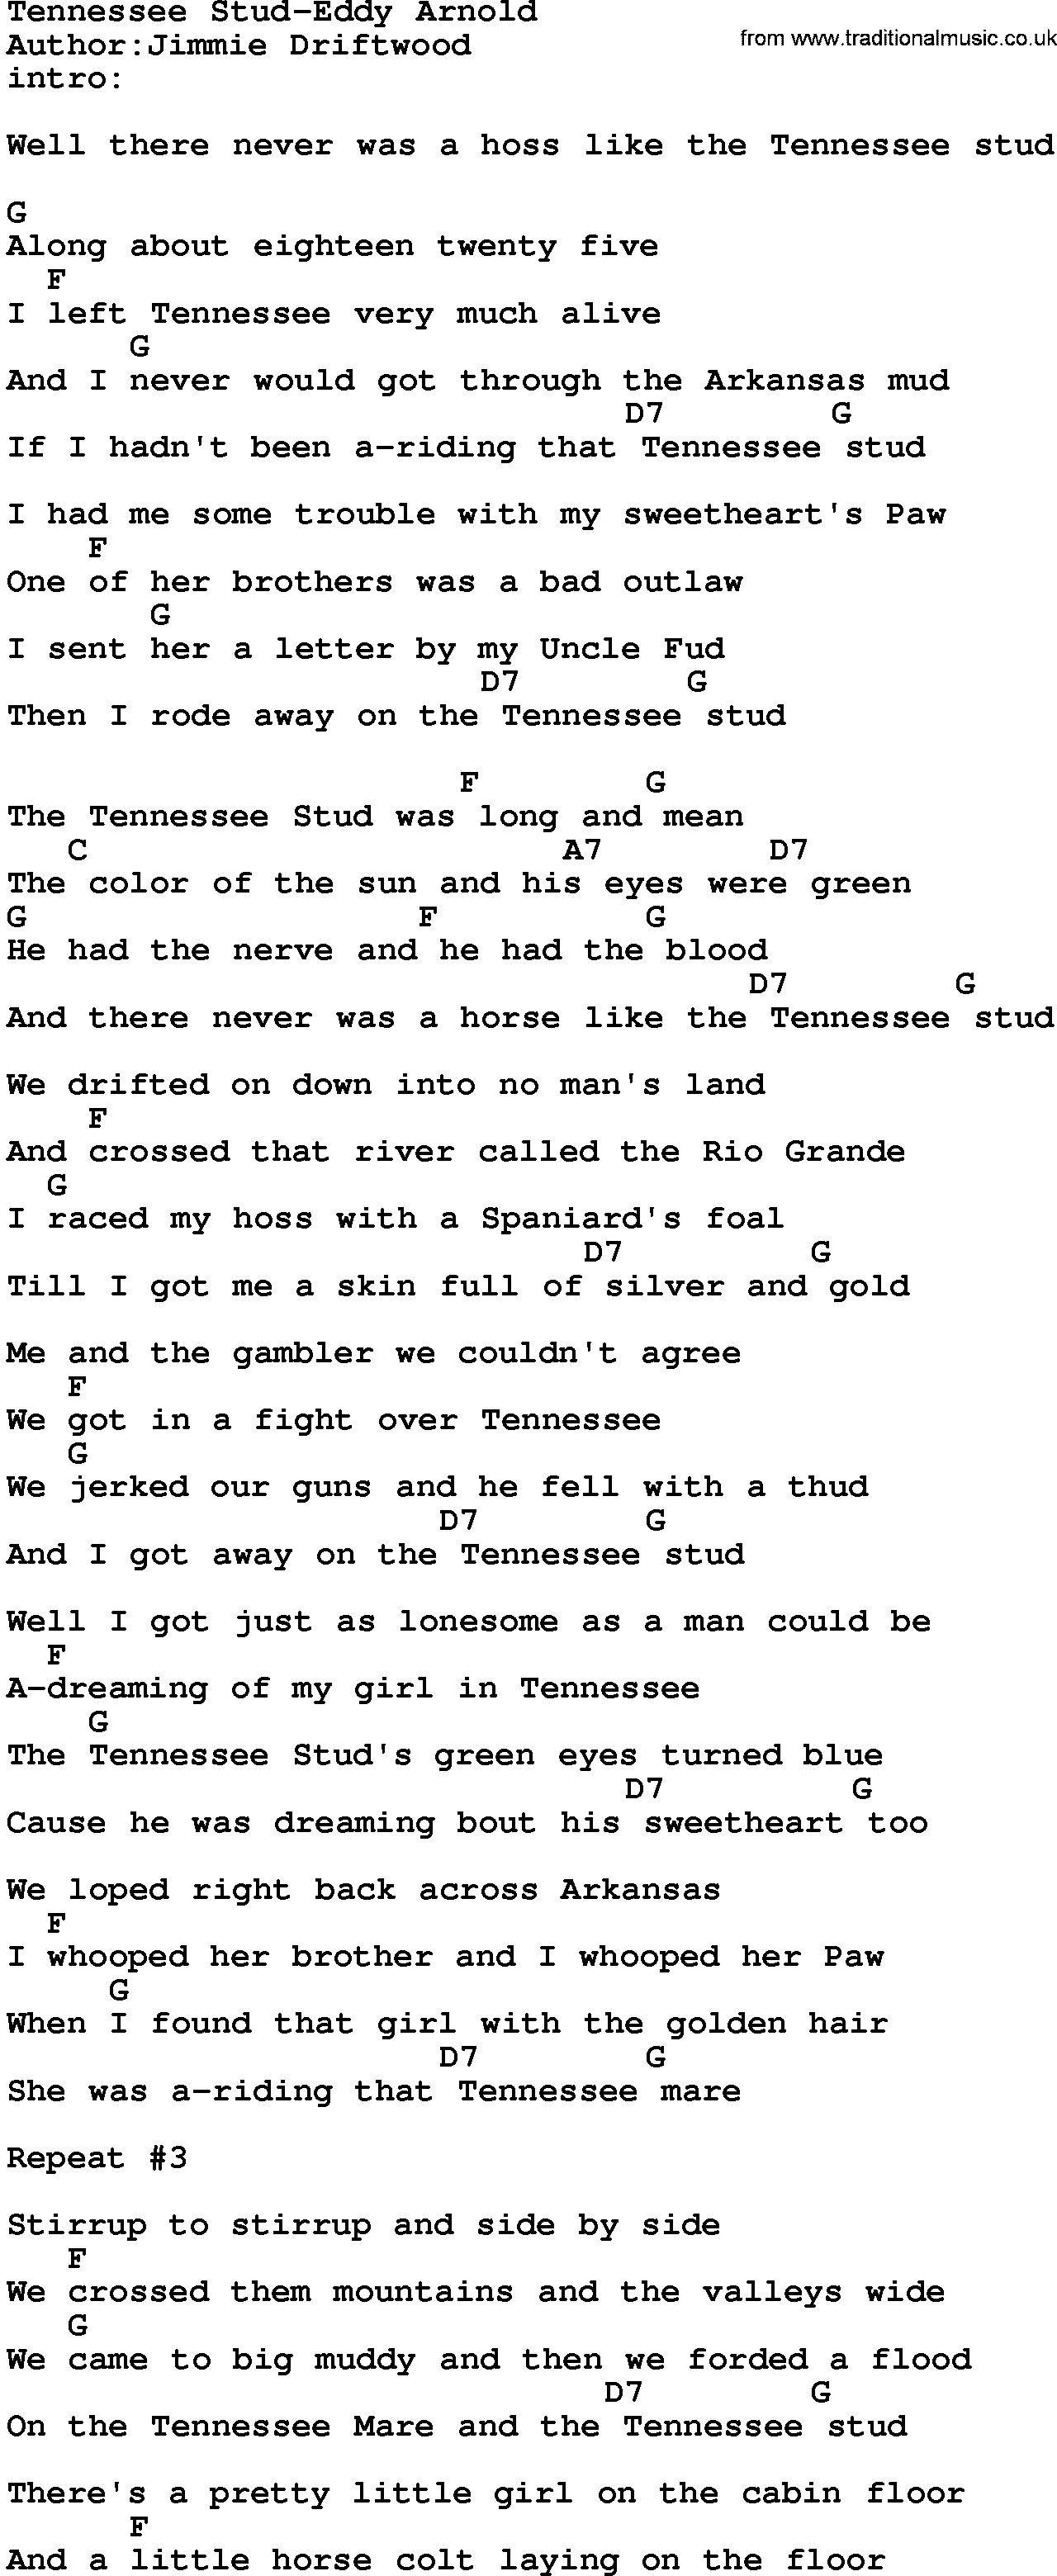 Country music song: Tennessee Stud-Eddy Arnold lyrics and chords